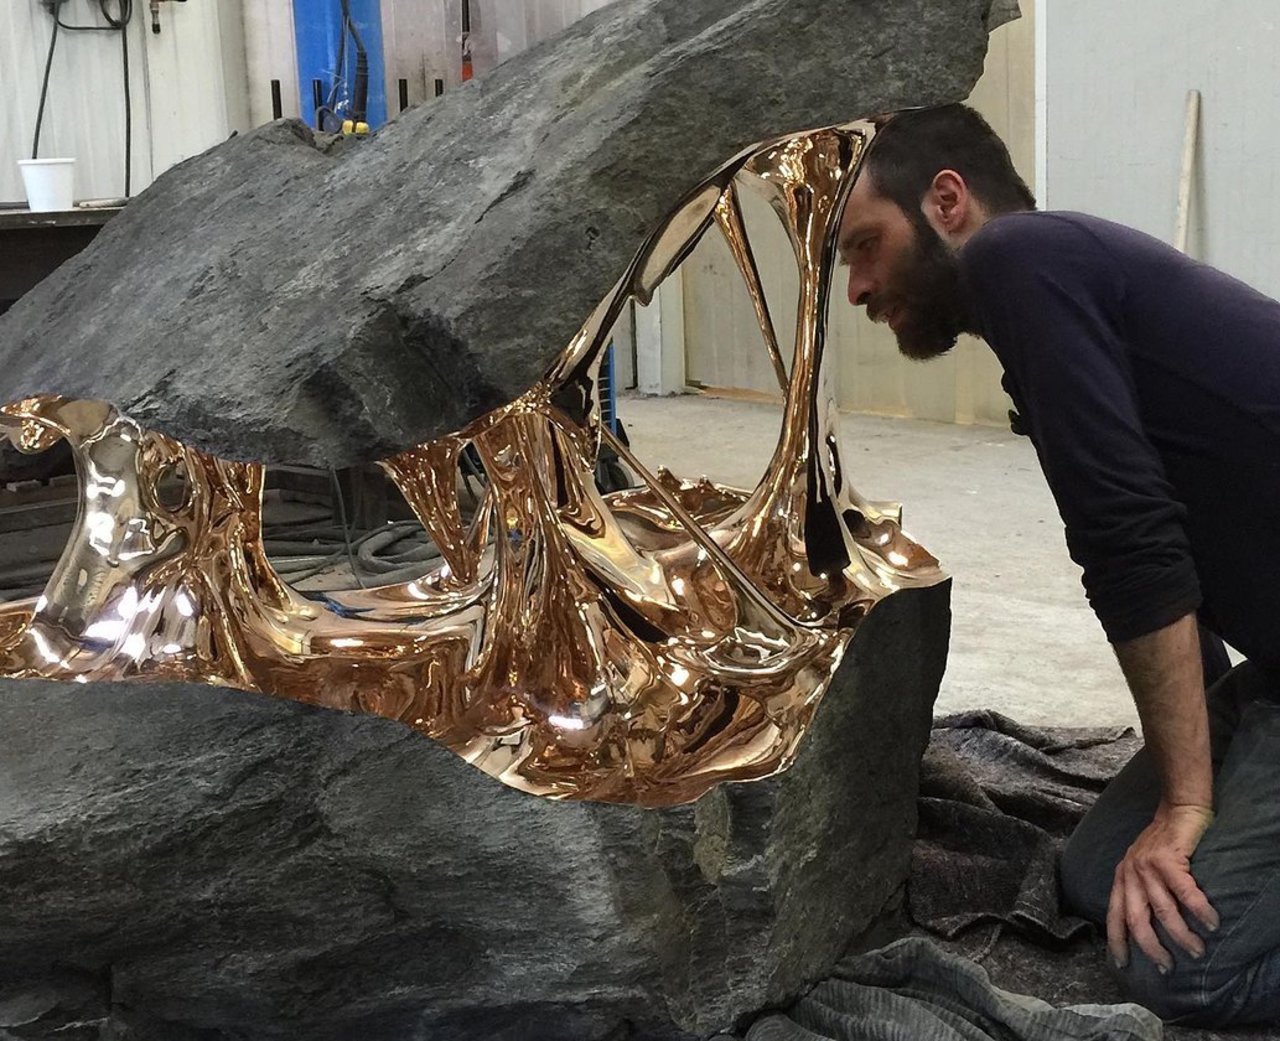 Check out Romain Langlois' bisected boulders with stretched bronze interiors. https://t.co/ruj2Tk8BOr